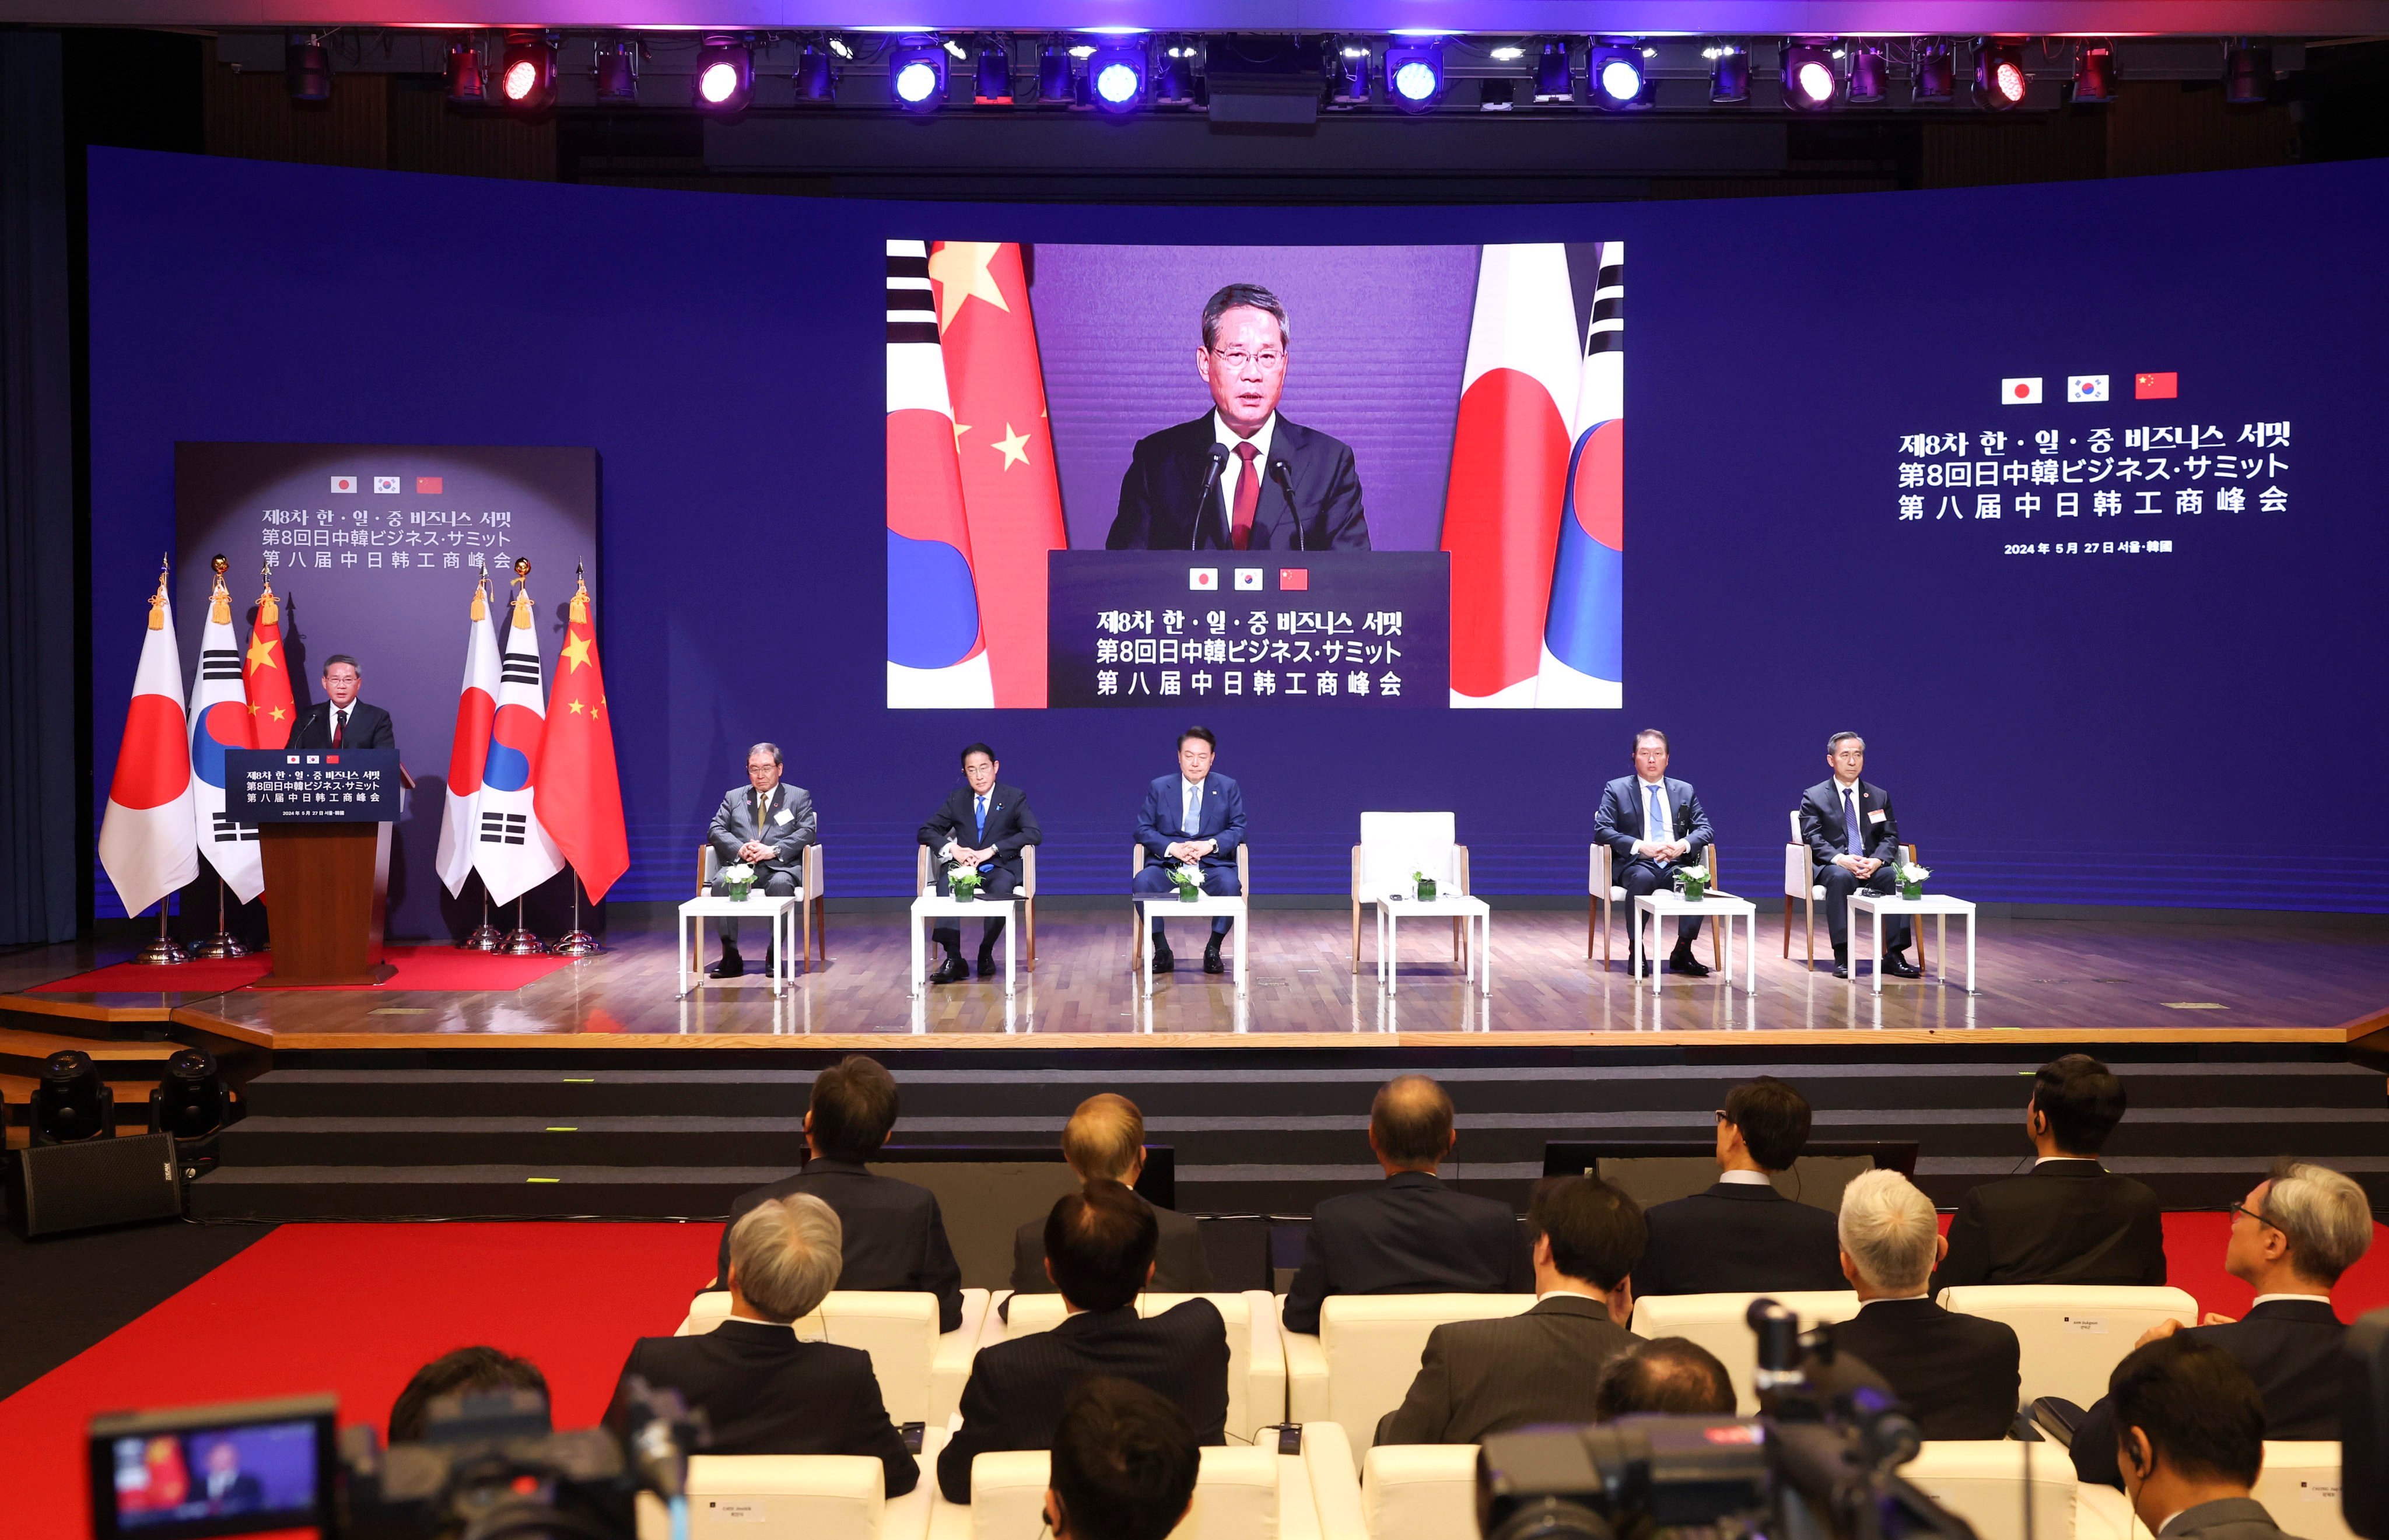 Chinese Premier Li Qiang speaks at the eighth business summit among China, Japan and South Korea, in Seoul. Photo: Xinhua